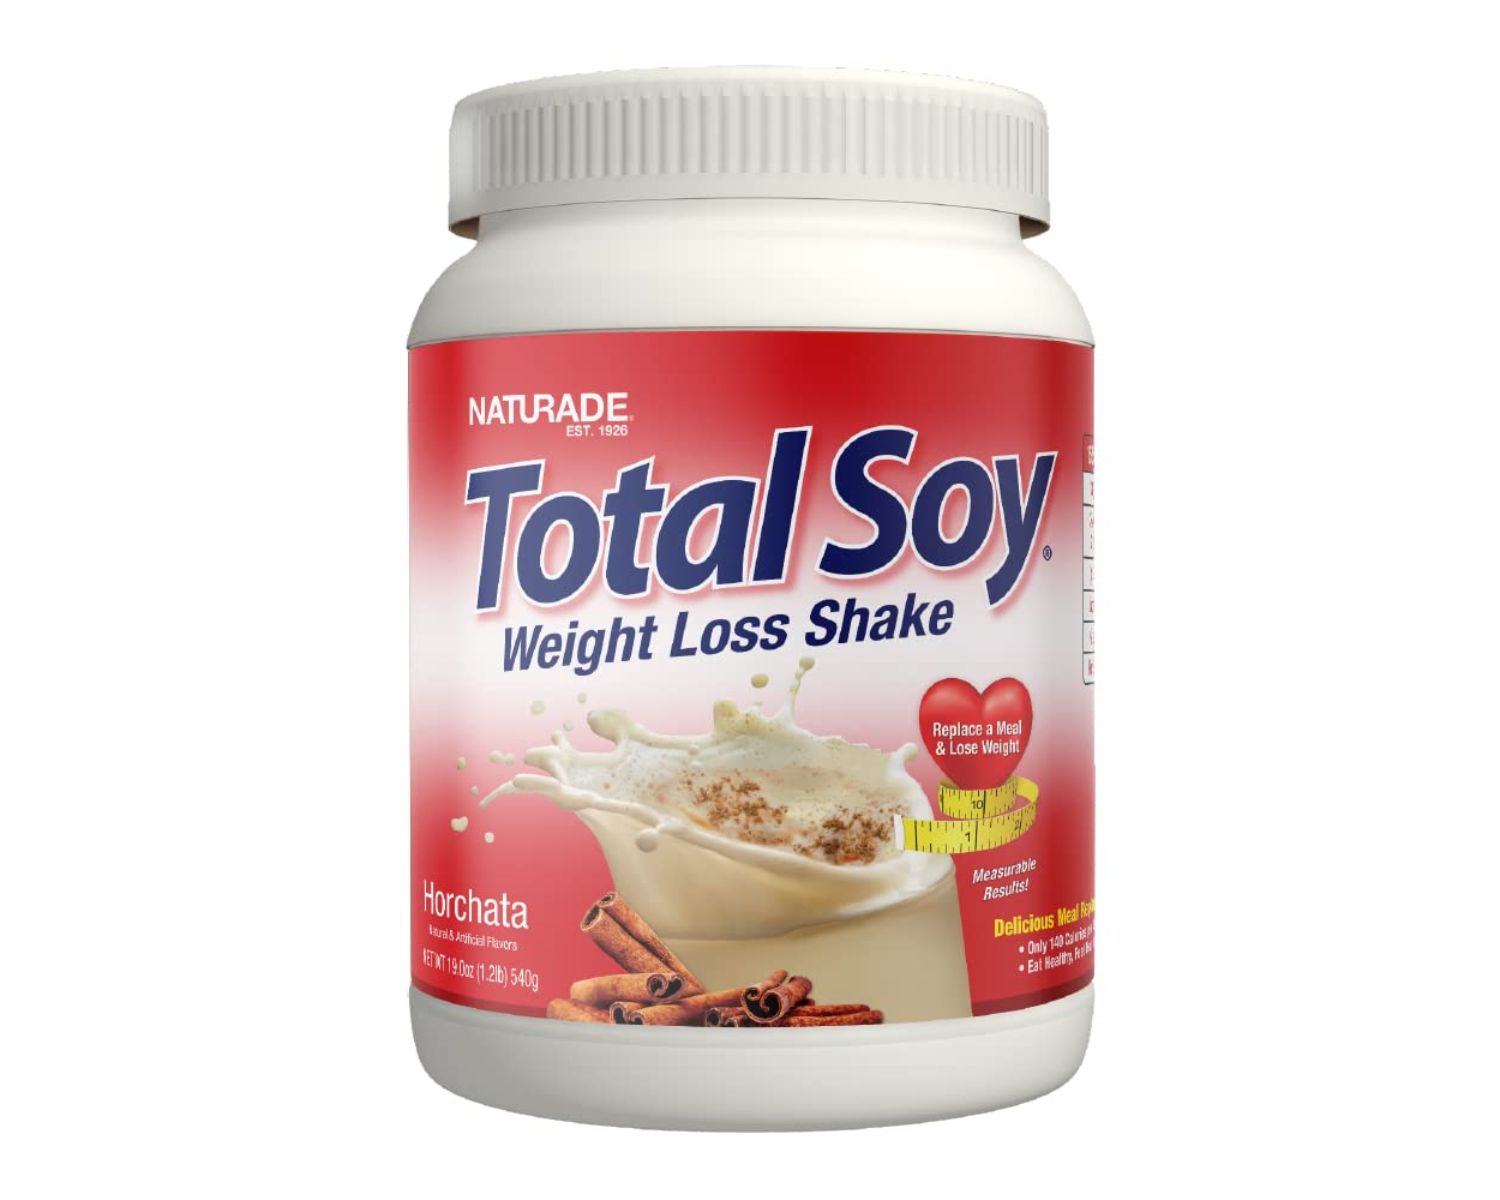 20-total-soy-nutrition-facts